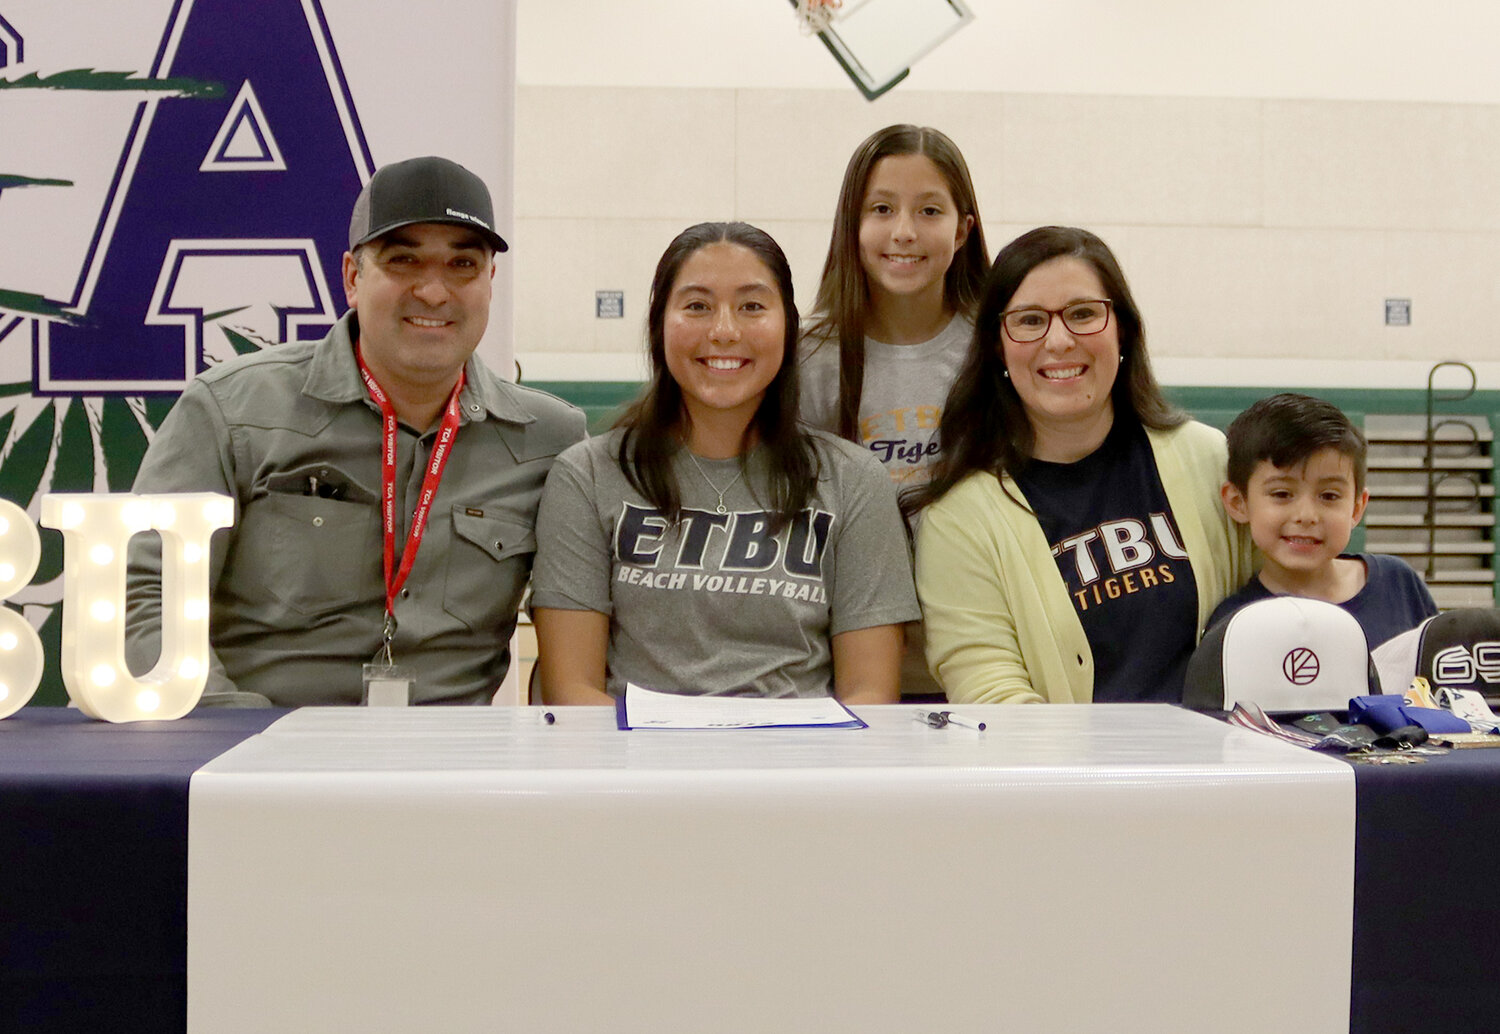 Dora Sagala, surrounded by family, signed to play beach volleyball at East Texas Baptist University.